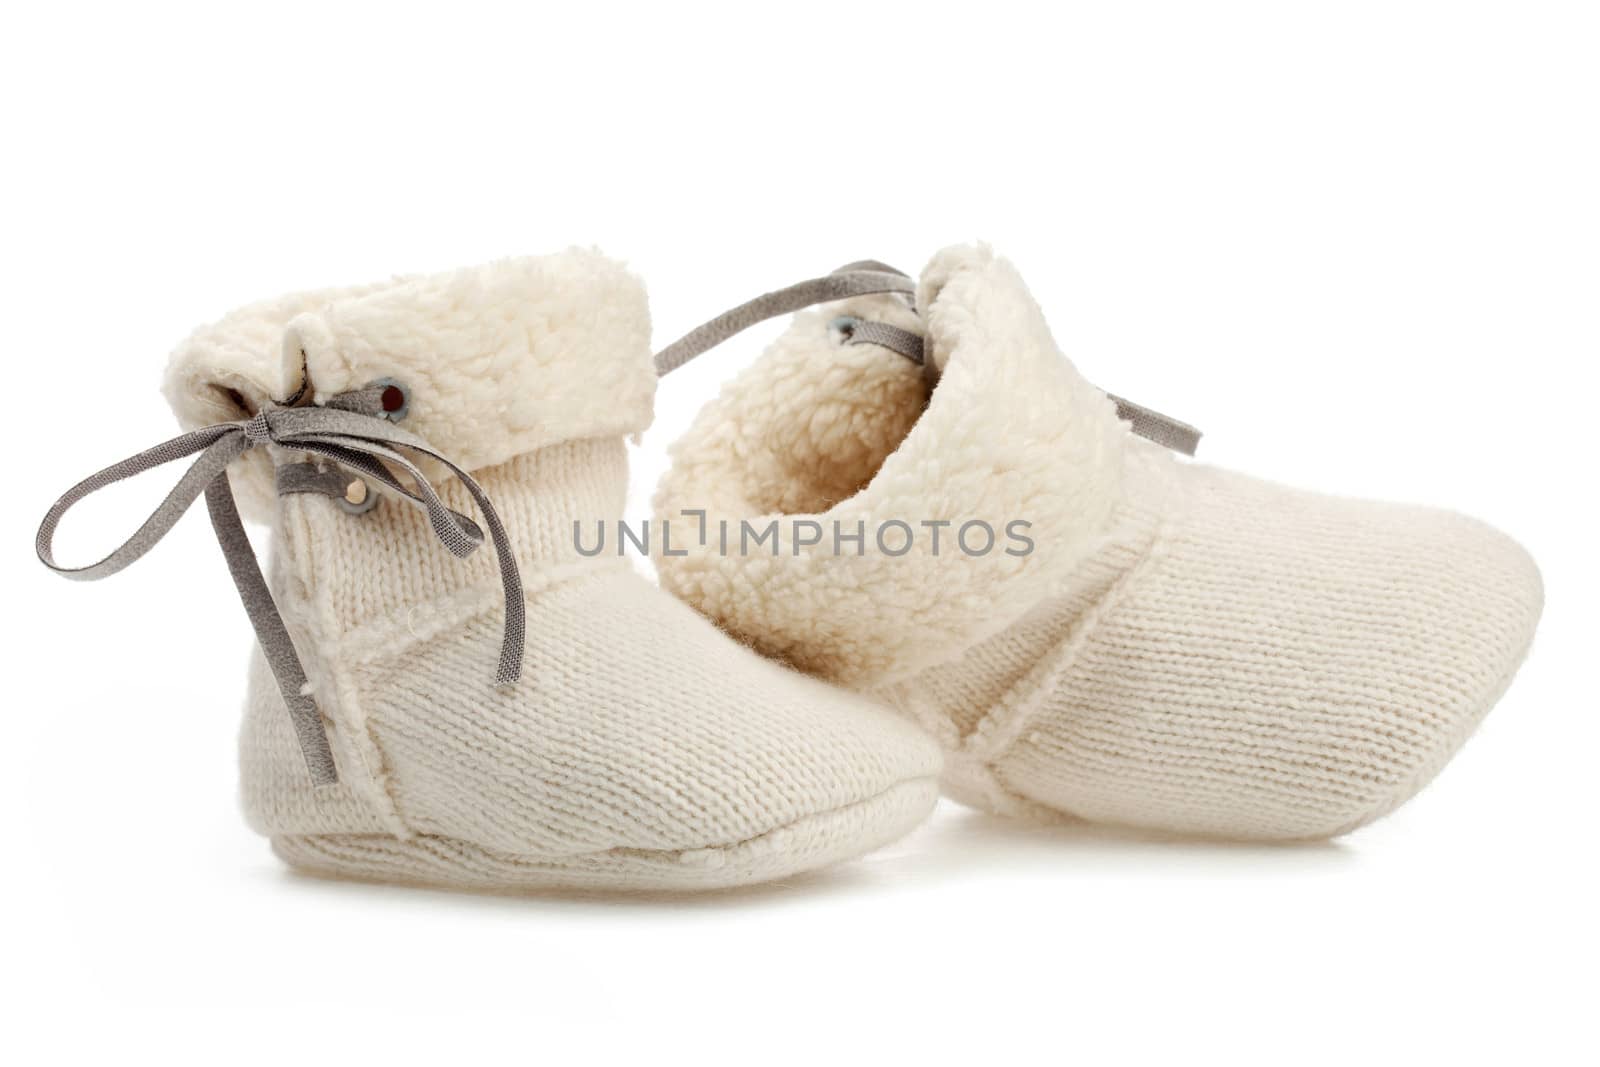 Pair of baby booties isolated over white background